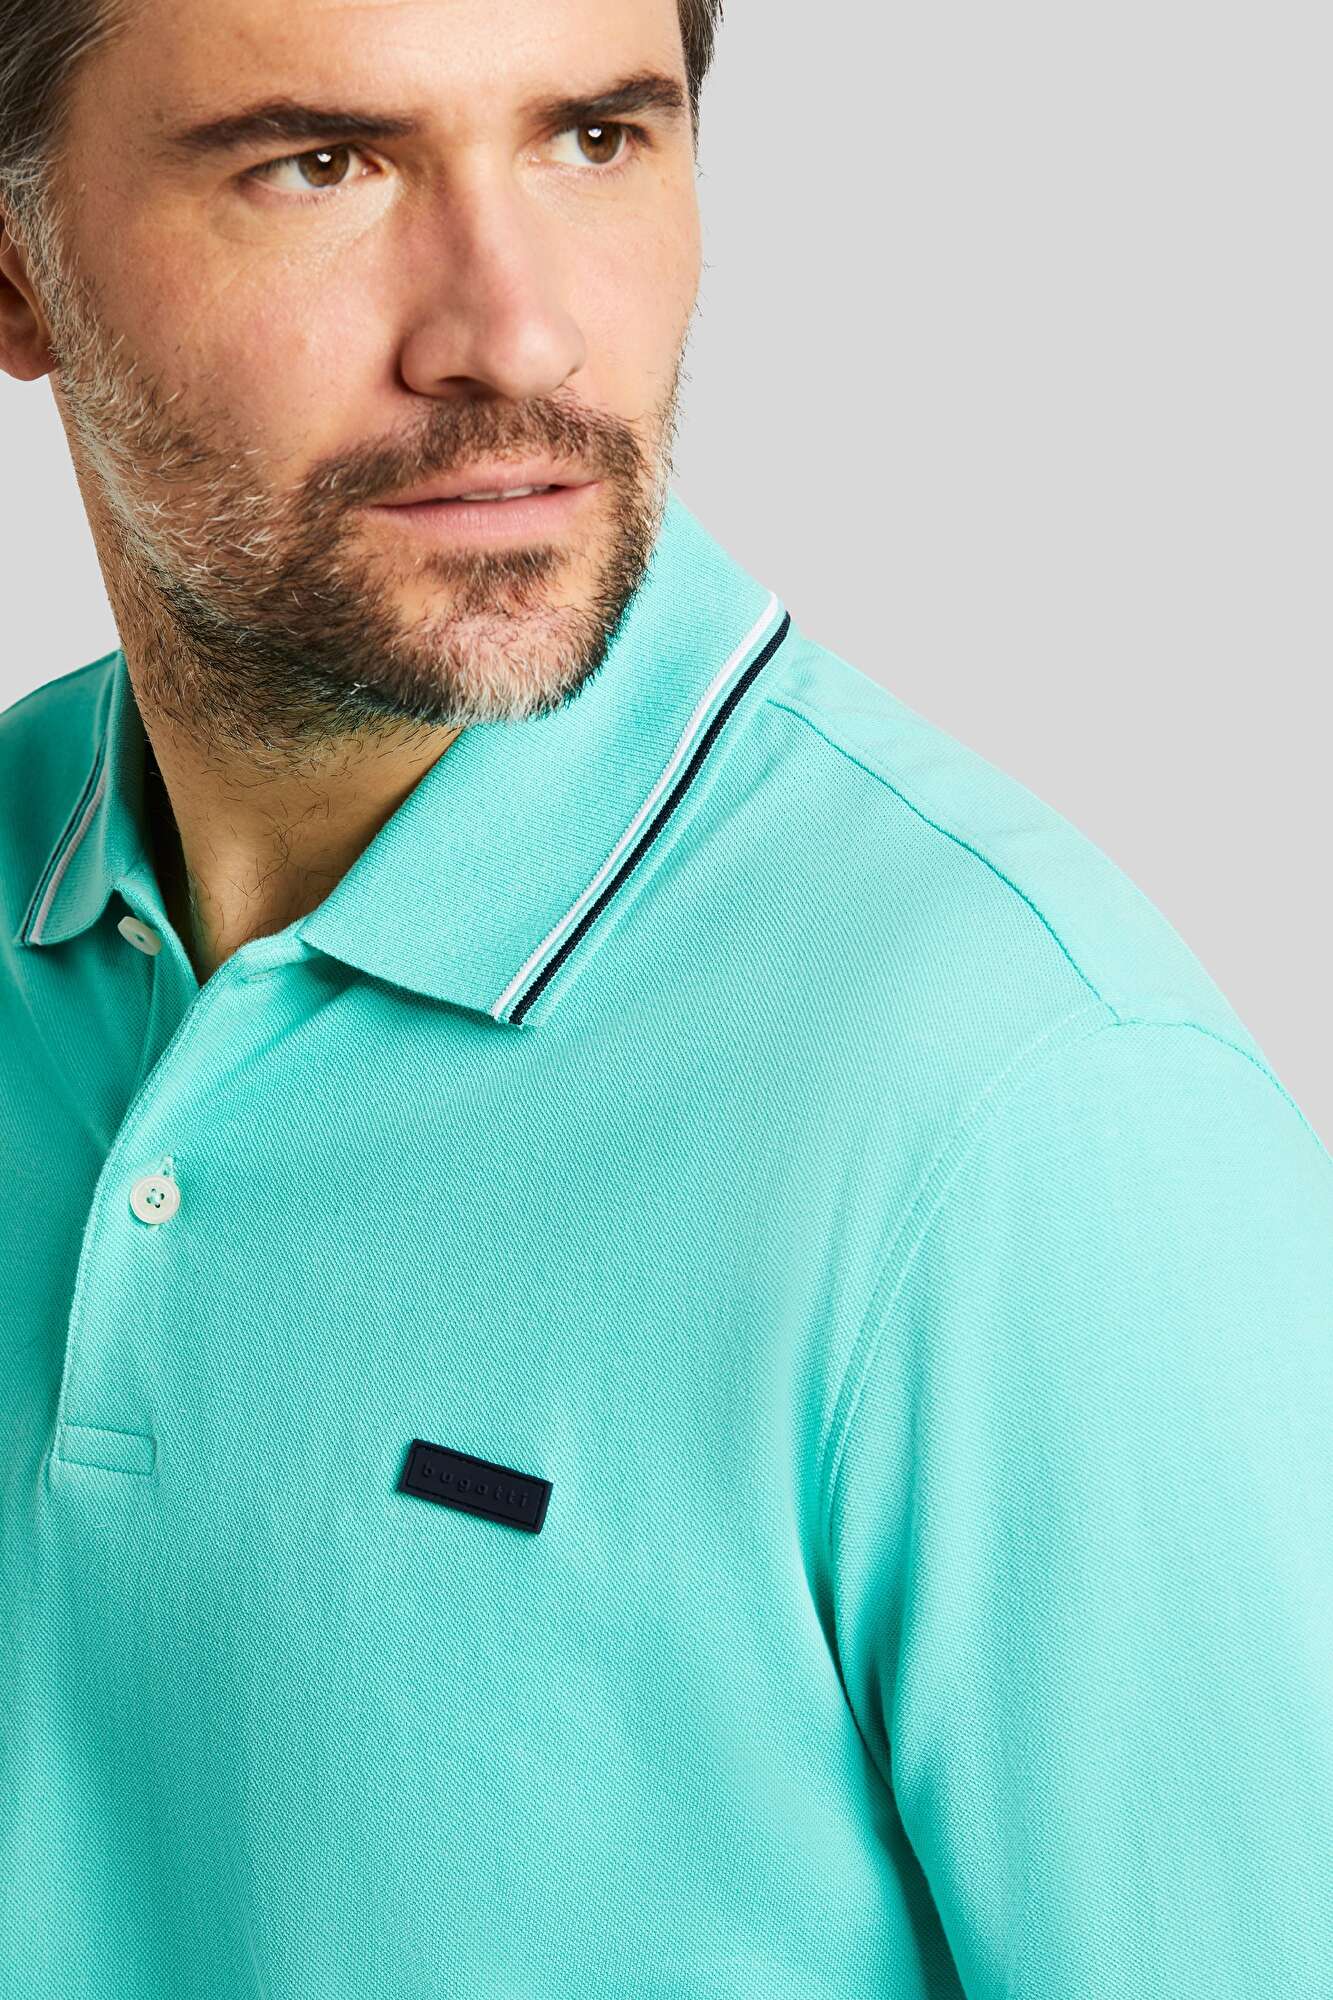 Pique polo shirt with contrasting collar and | mint sleeve in bugatti cuffs on stripes the